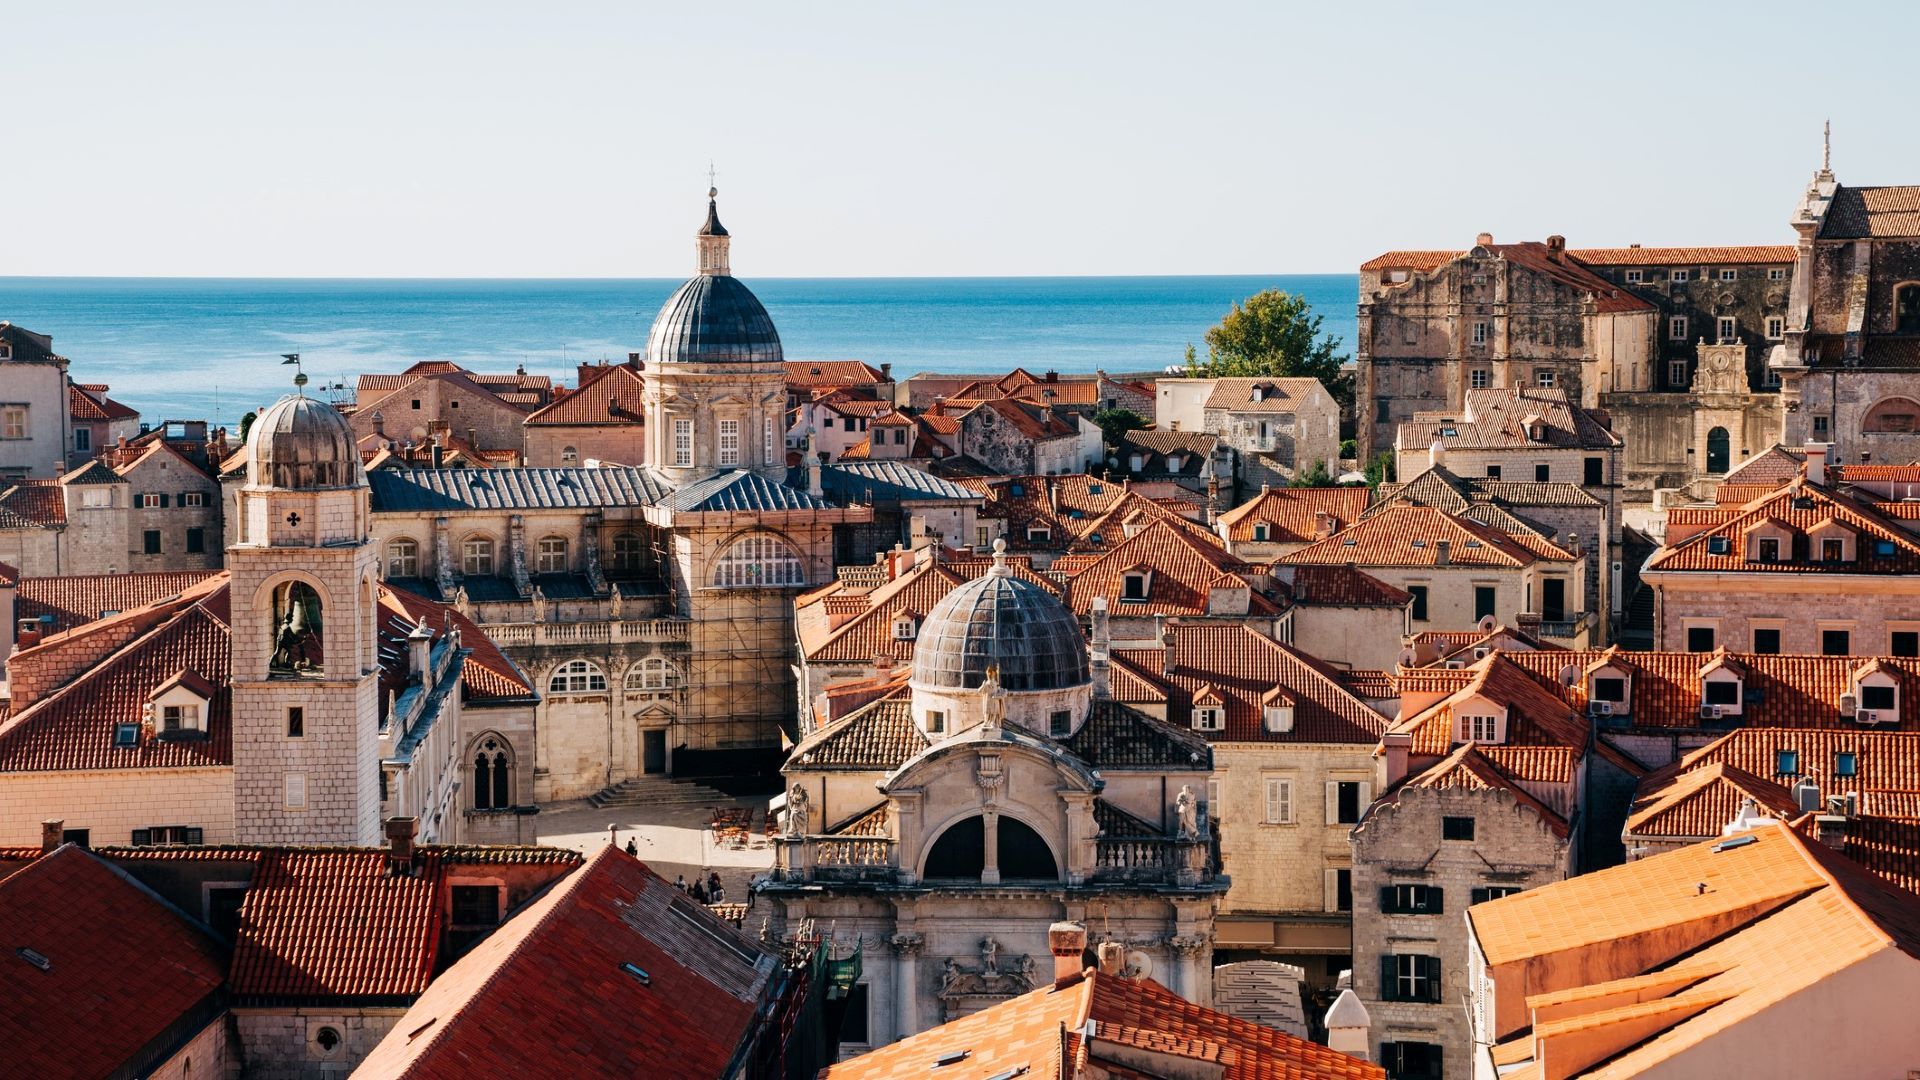 <p>                     The home of, you guessed it, Dalmatians! Croatians are famous dog lovers and you won’t struggle to find pet-friendly accommodation in this region that stretches along the Adriatic Sea.                    </p>